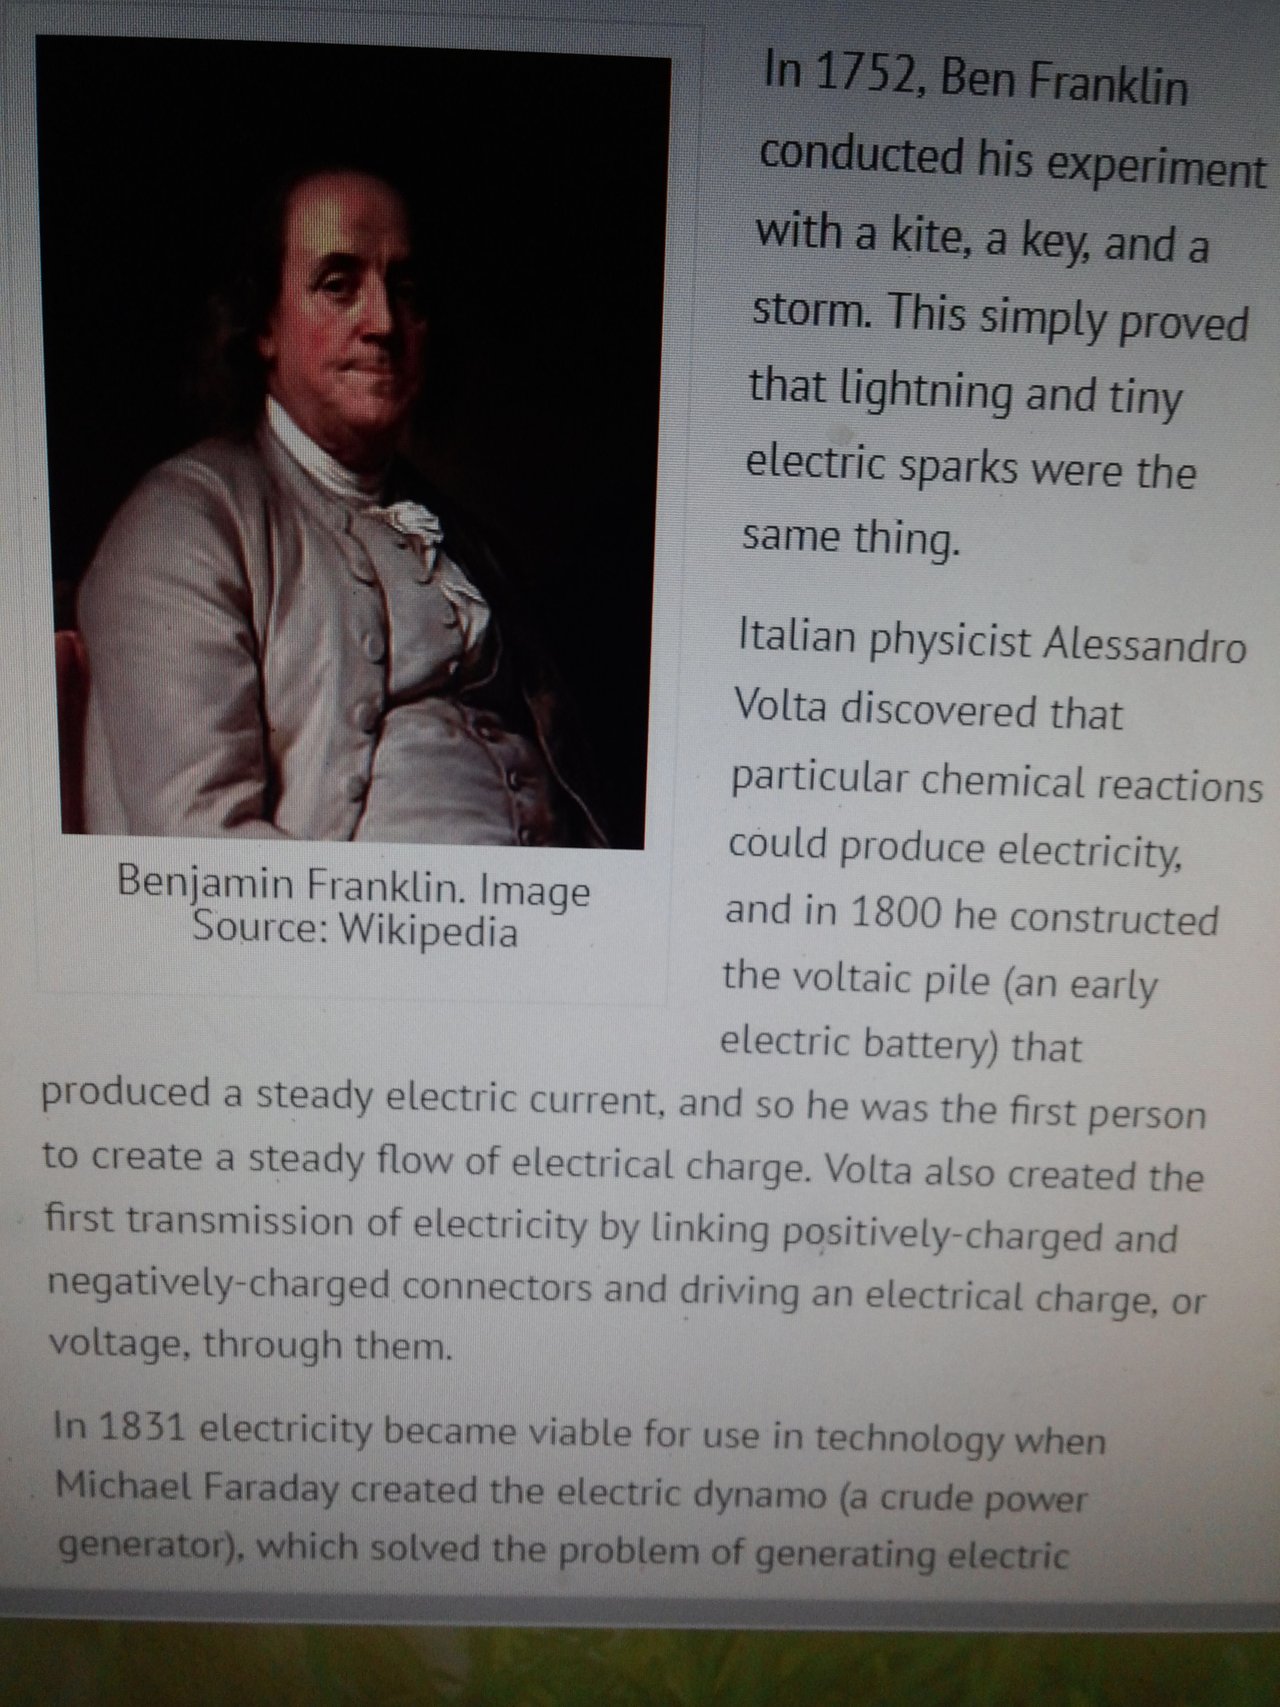 the person who discovered electricity